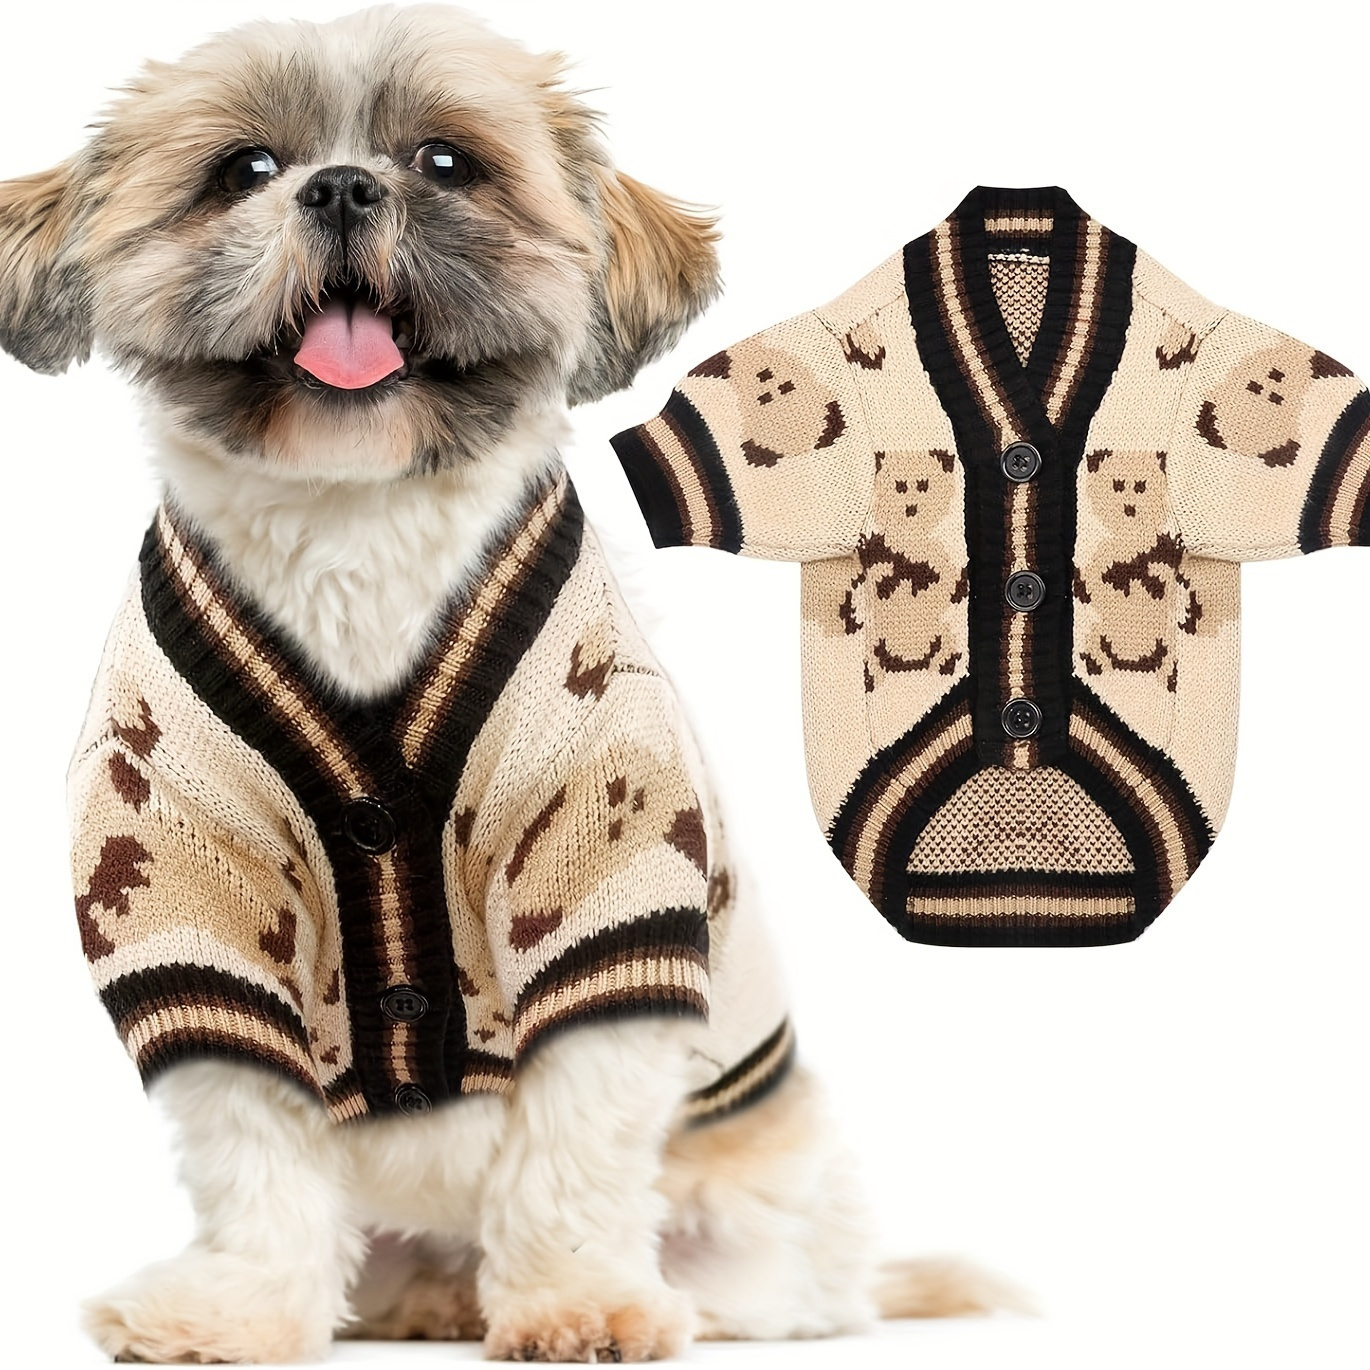 

Cartoon Graphic Dog Sweaters, Cute Bear Dog Cardigans Clothes For Small Dogs, Puppy Knitting Outfits, Dog Winter Coats, Warm Pet Dog Clothes, Soft Knitwear Apparel